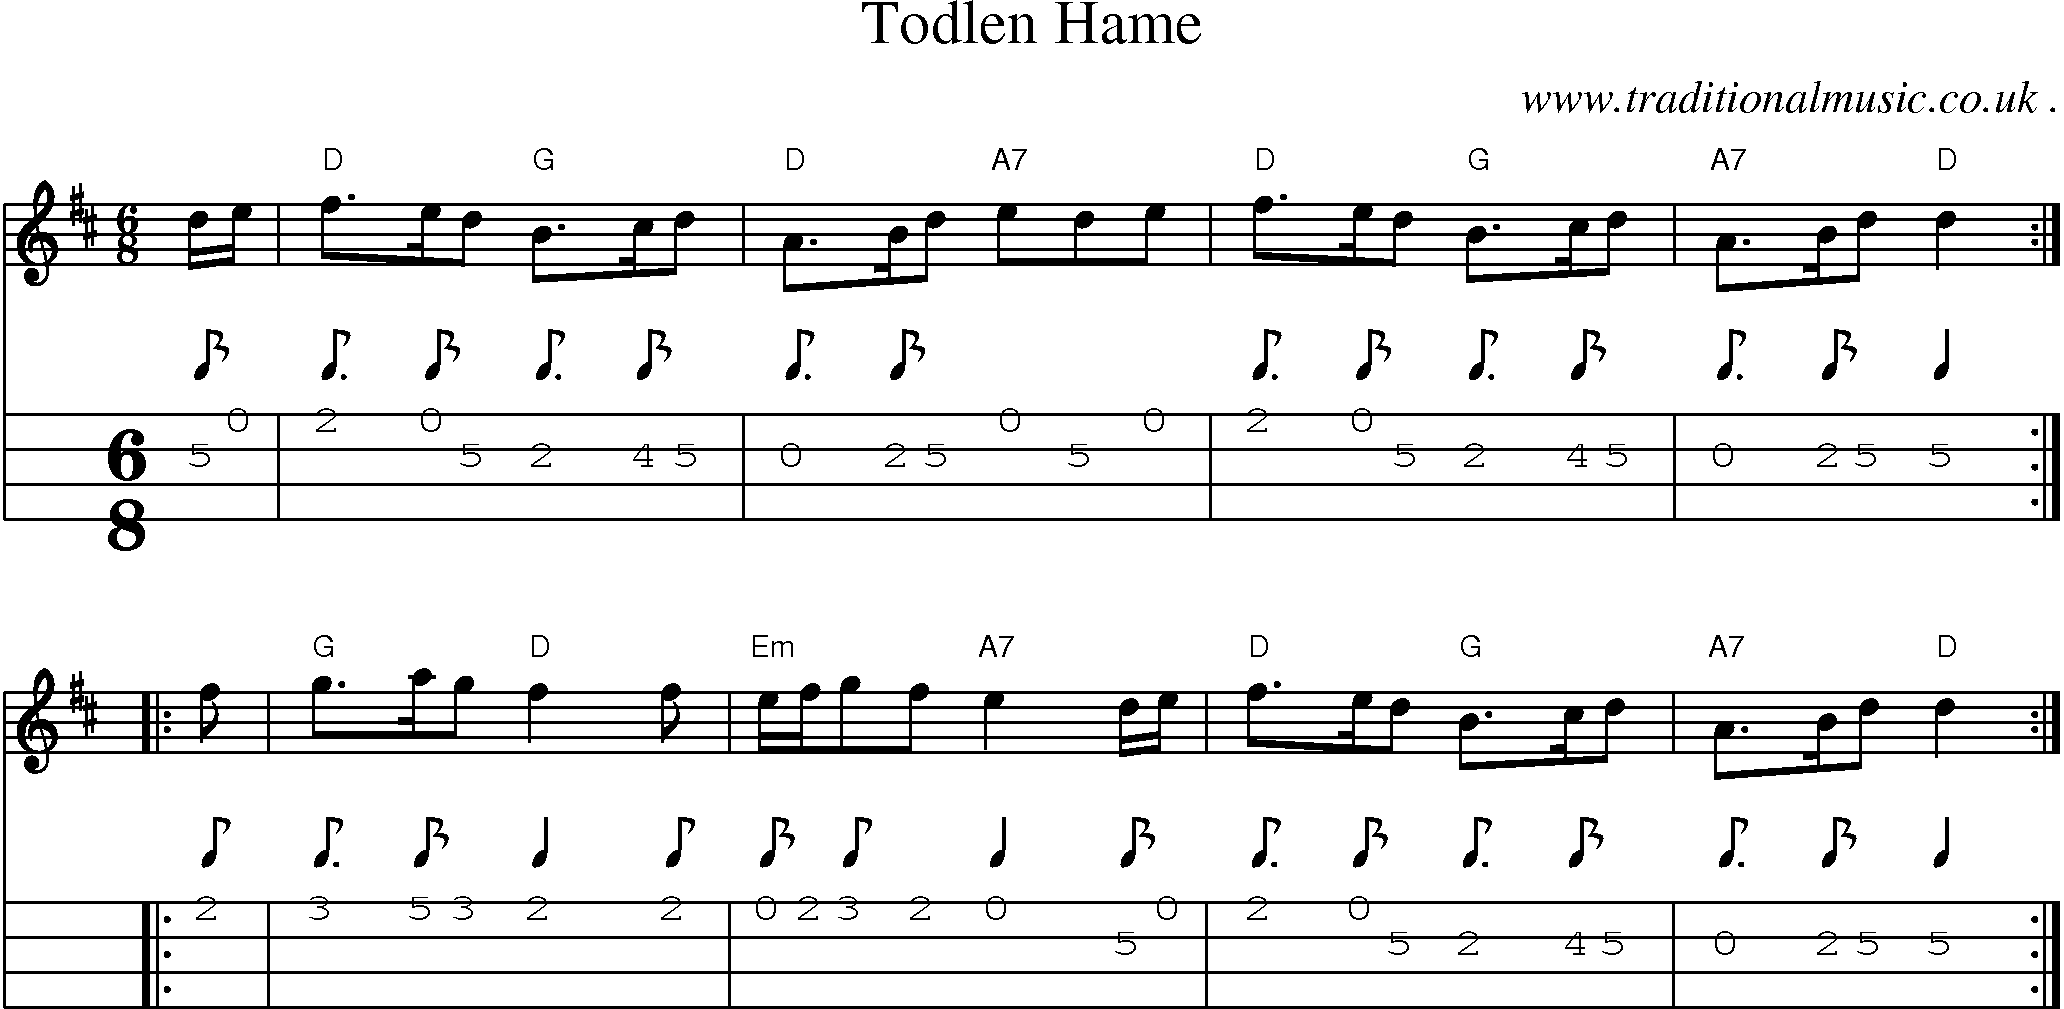 Sheet-music  score, Chords and Mandolin Tabs for Todlen Hame